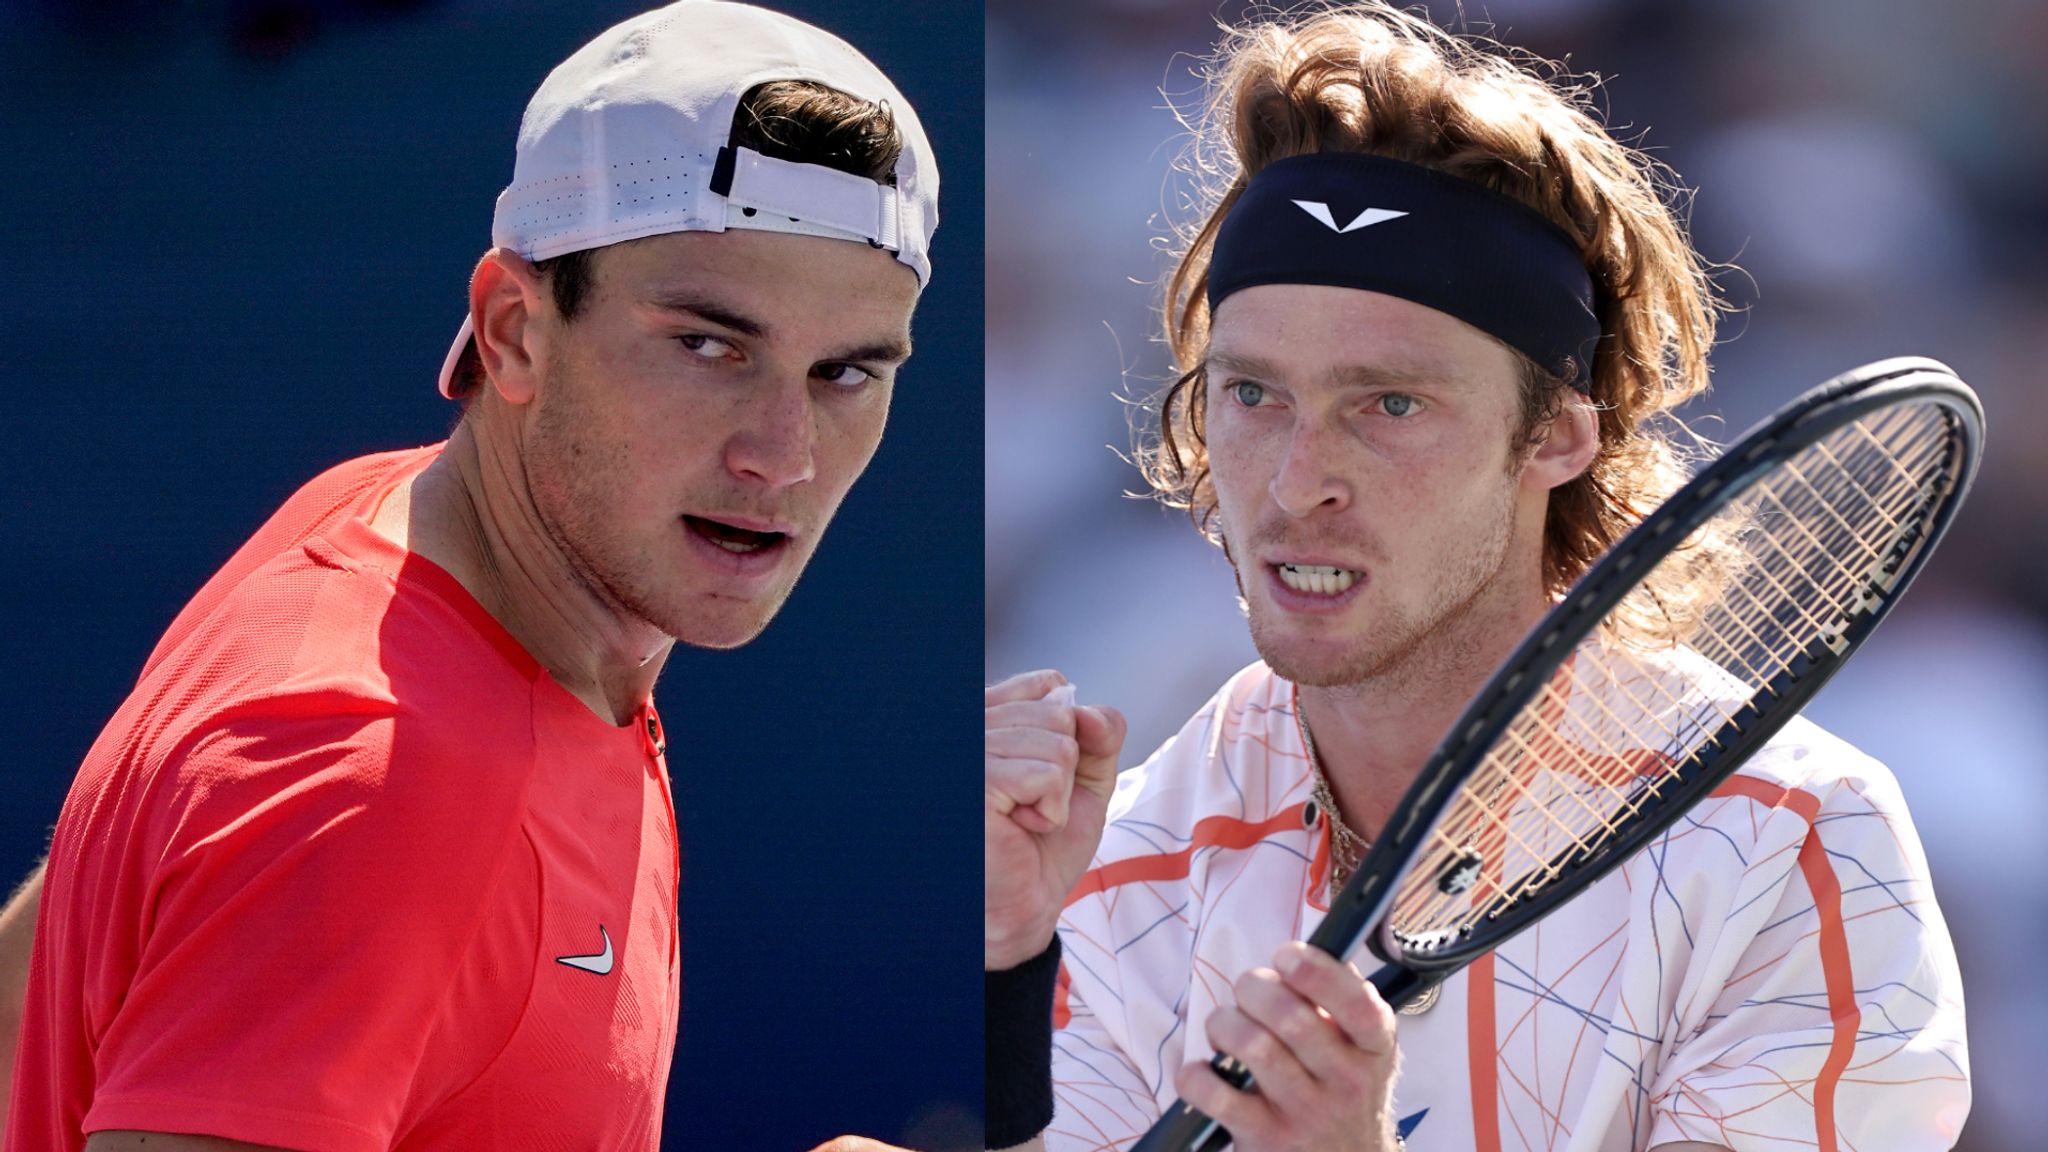 US Open Jack Draper takes on Andrey Rublev for quarter-final spot at Flushing Meadows Tennis News Sky Sports